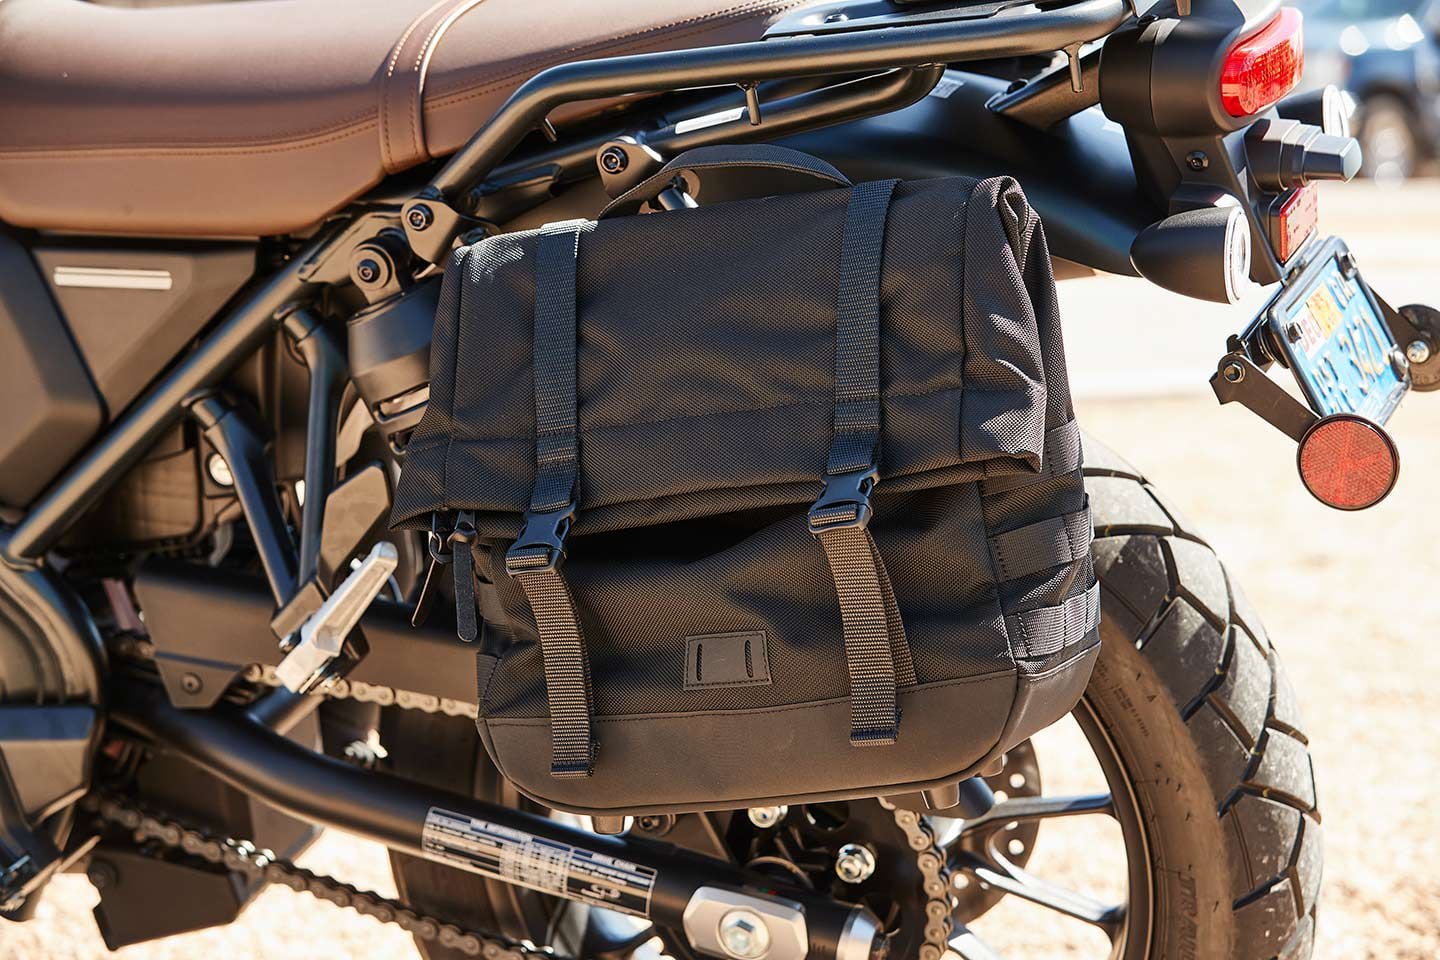 Accessory saddlebag available for the SCL500.